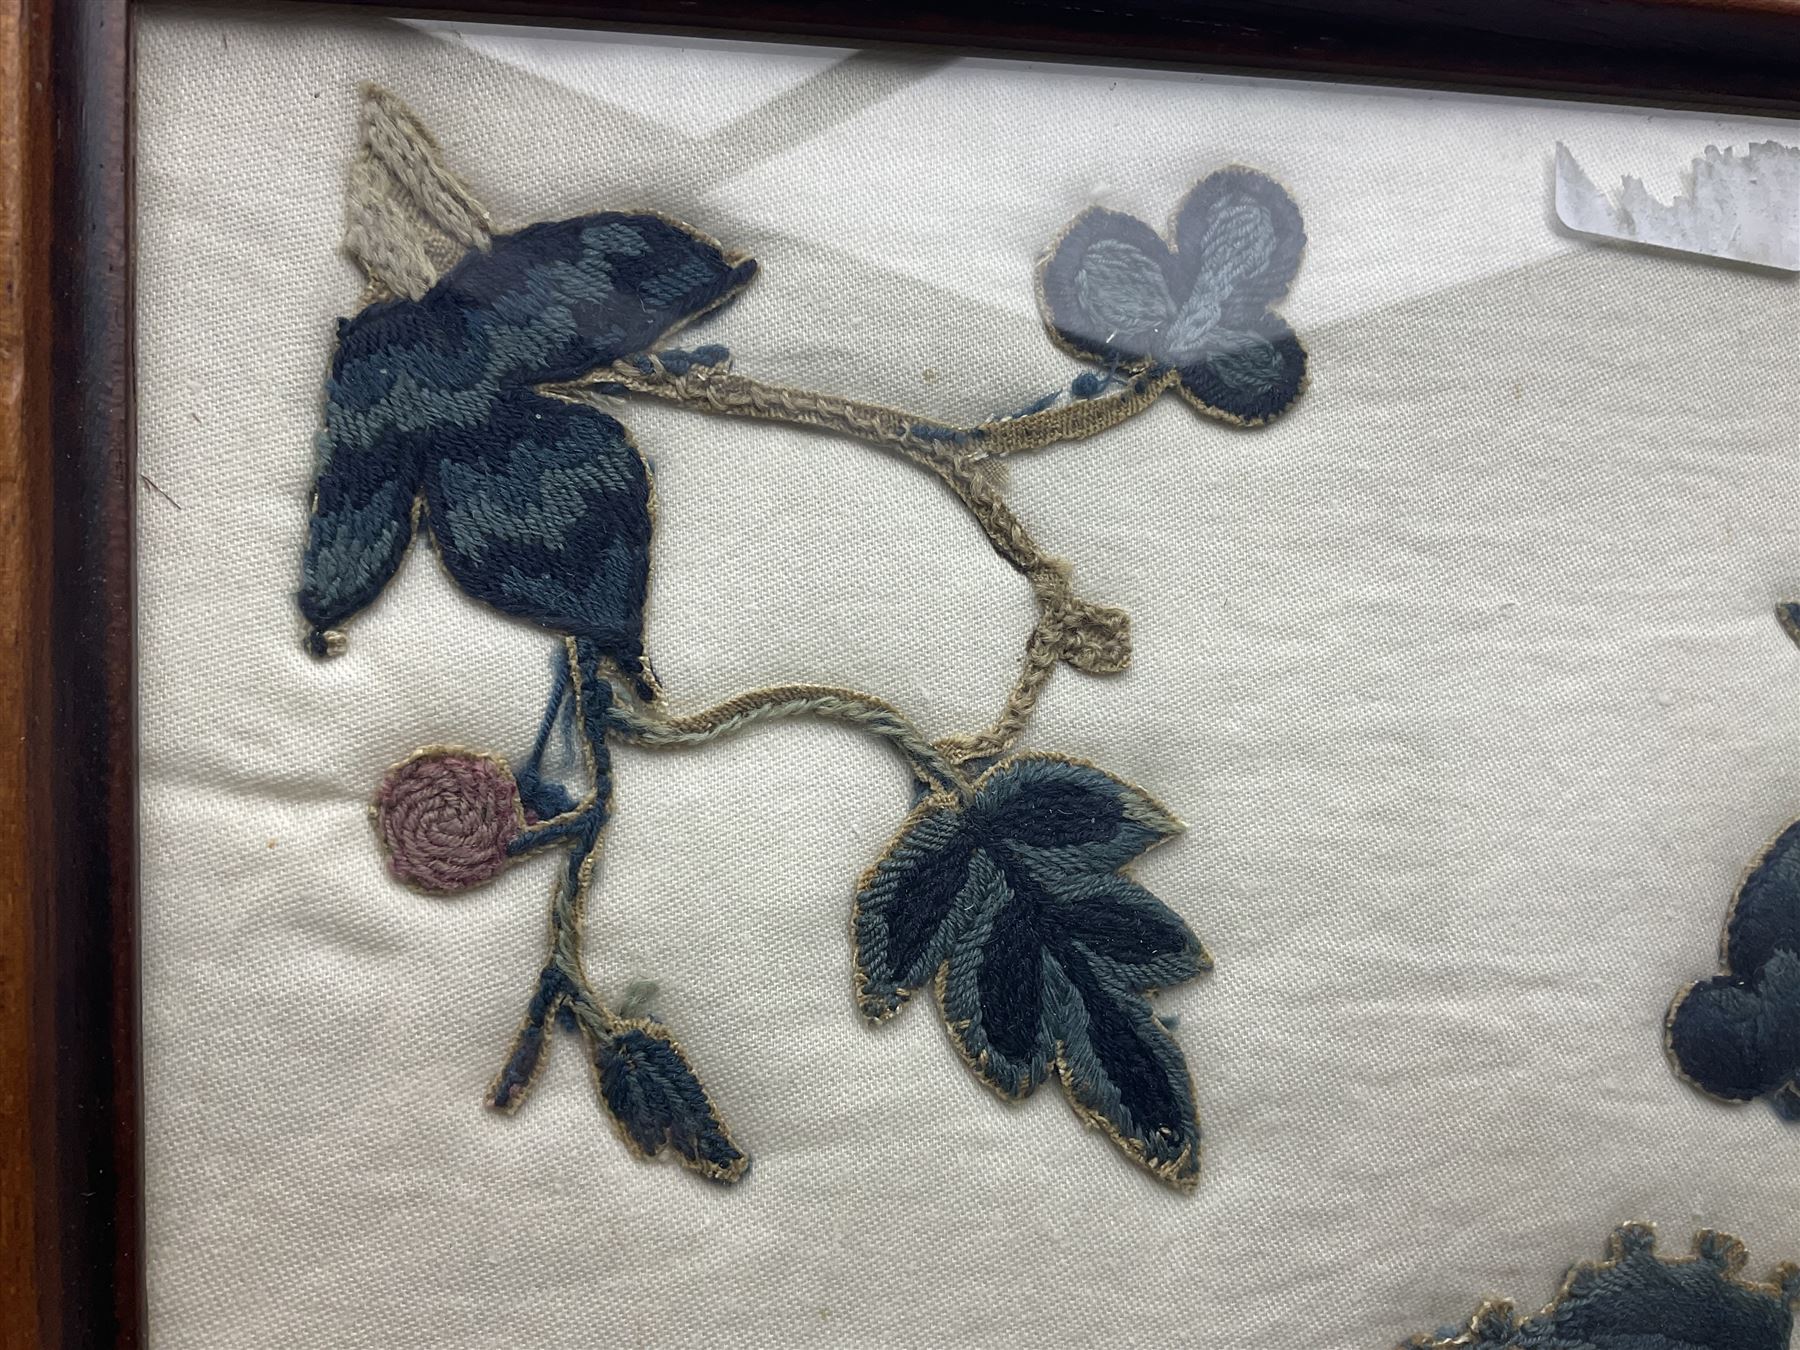 Framed crewelwork embroidered panel - Image 3 of 10